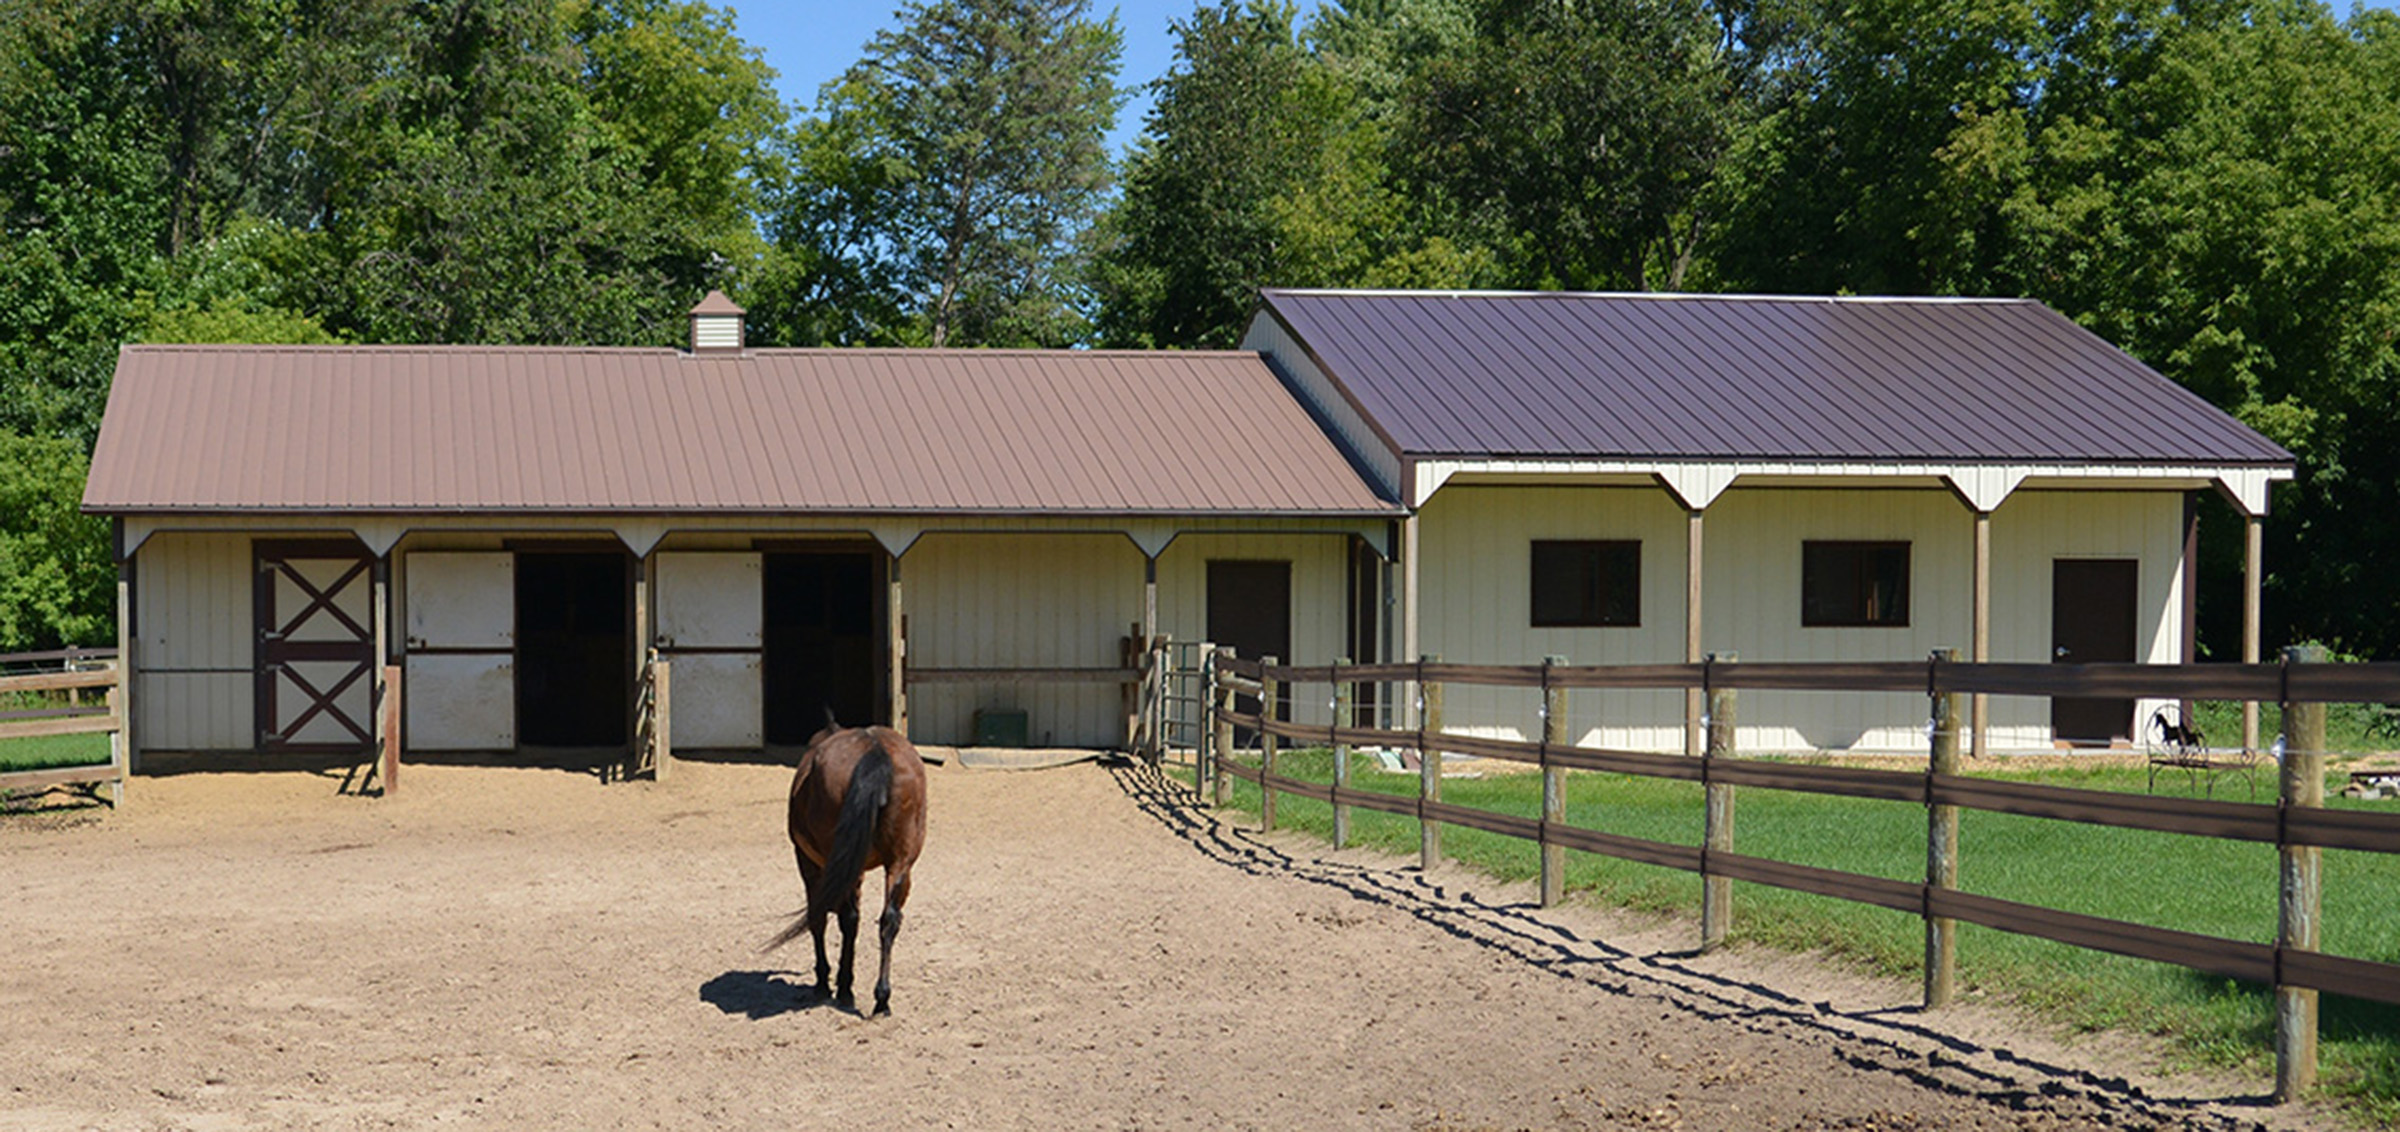 Cream and brown post frame equine building with a horse walking into it